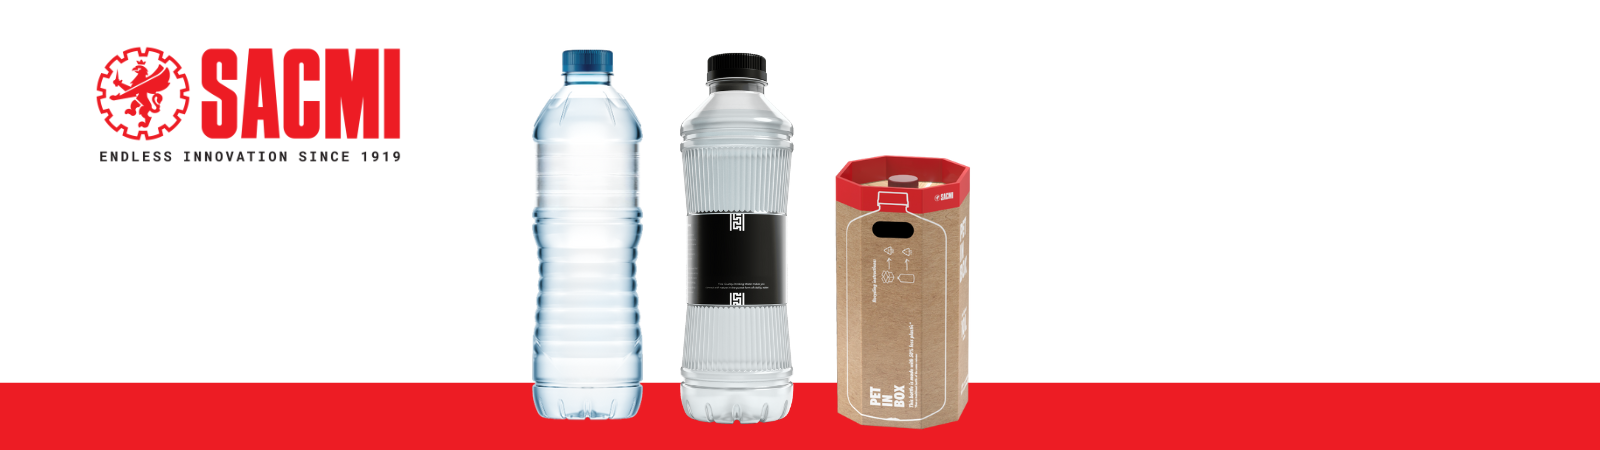 Bottle design 4 sustainability. The 'in-the-field' approach by SACMI